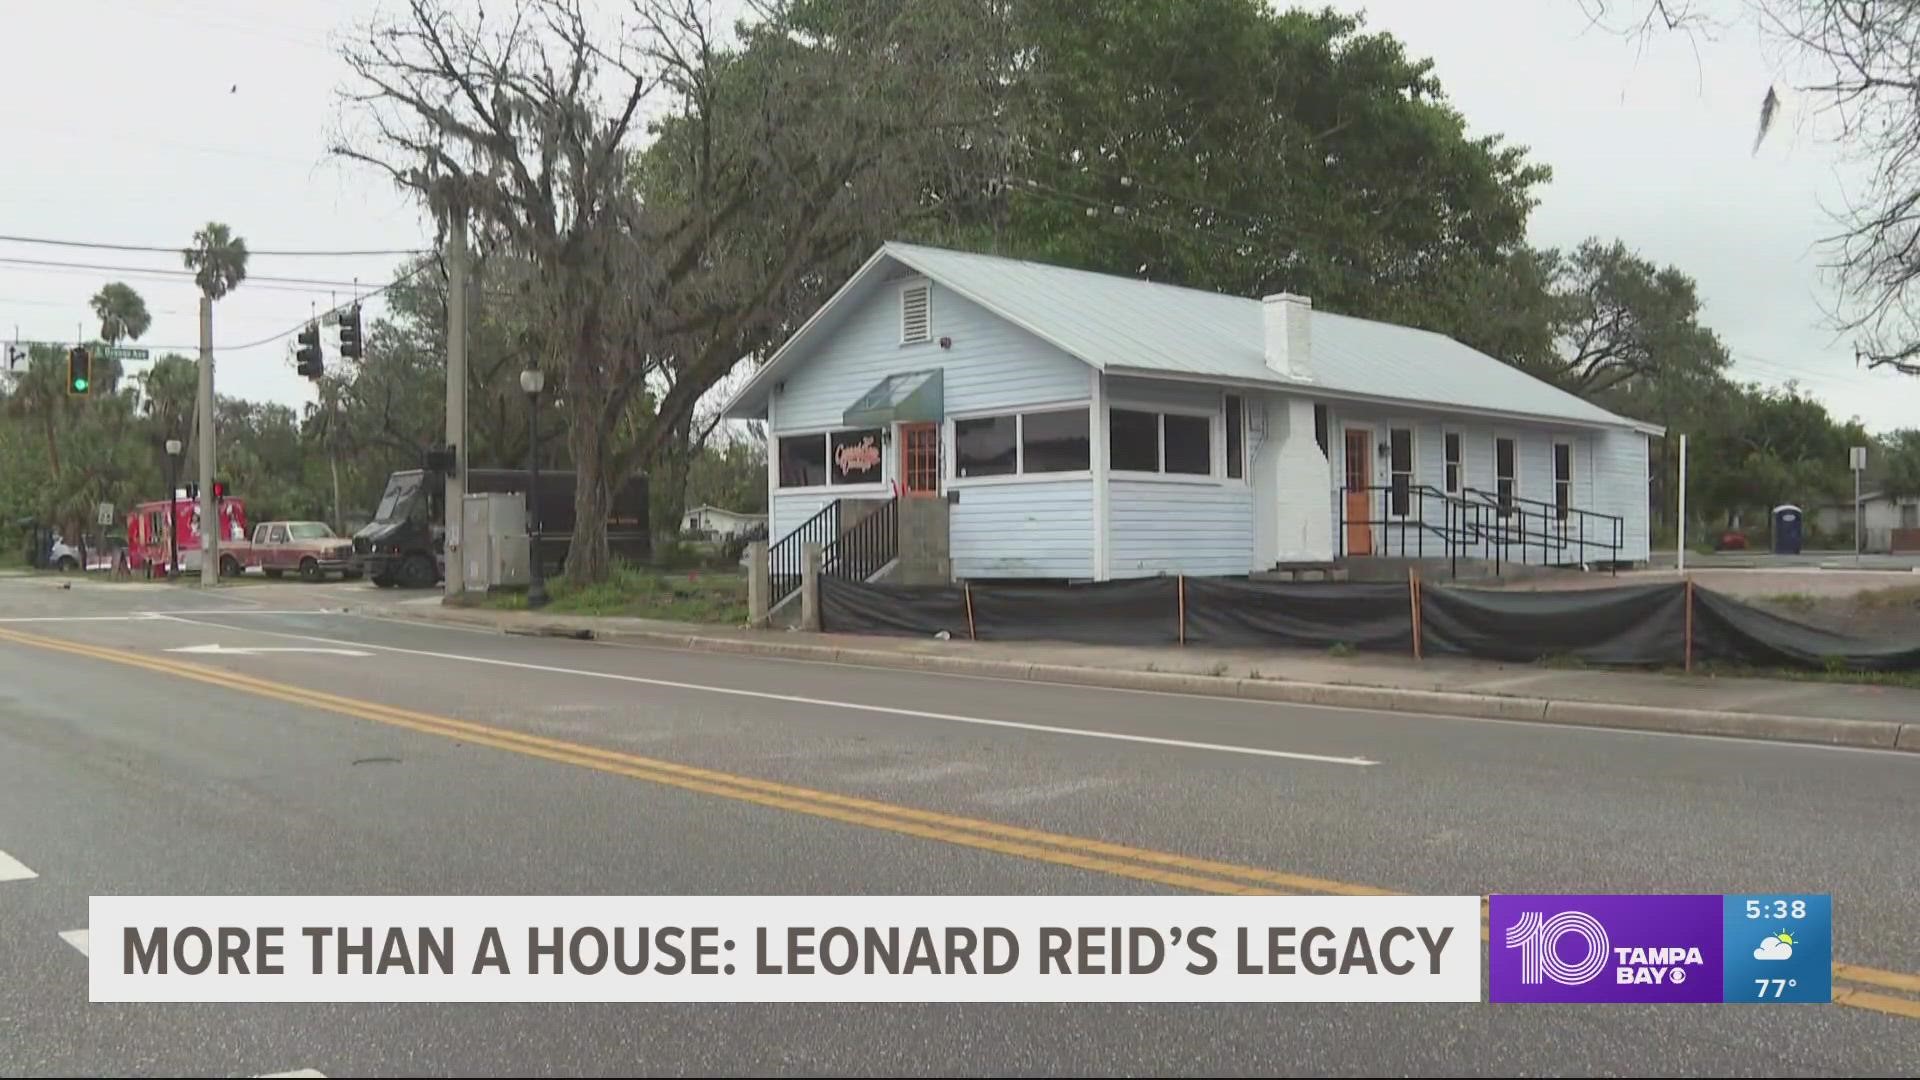 After missing his boat to Cuba, Leonard Reid, one of Sarasota's influential pioneer settlers ended up working for the Mayor, built his own house and set up a church.